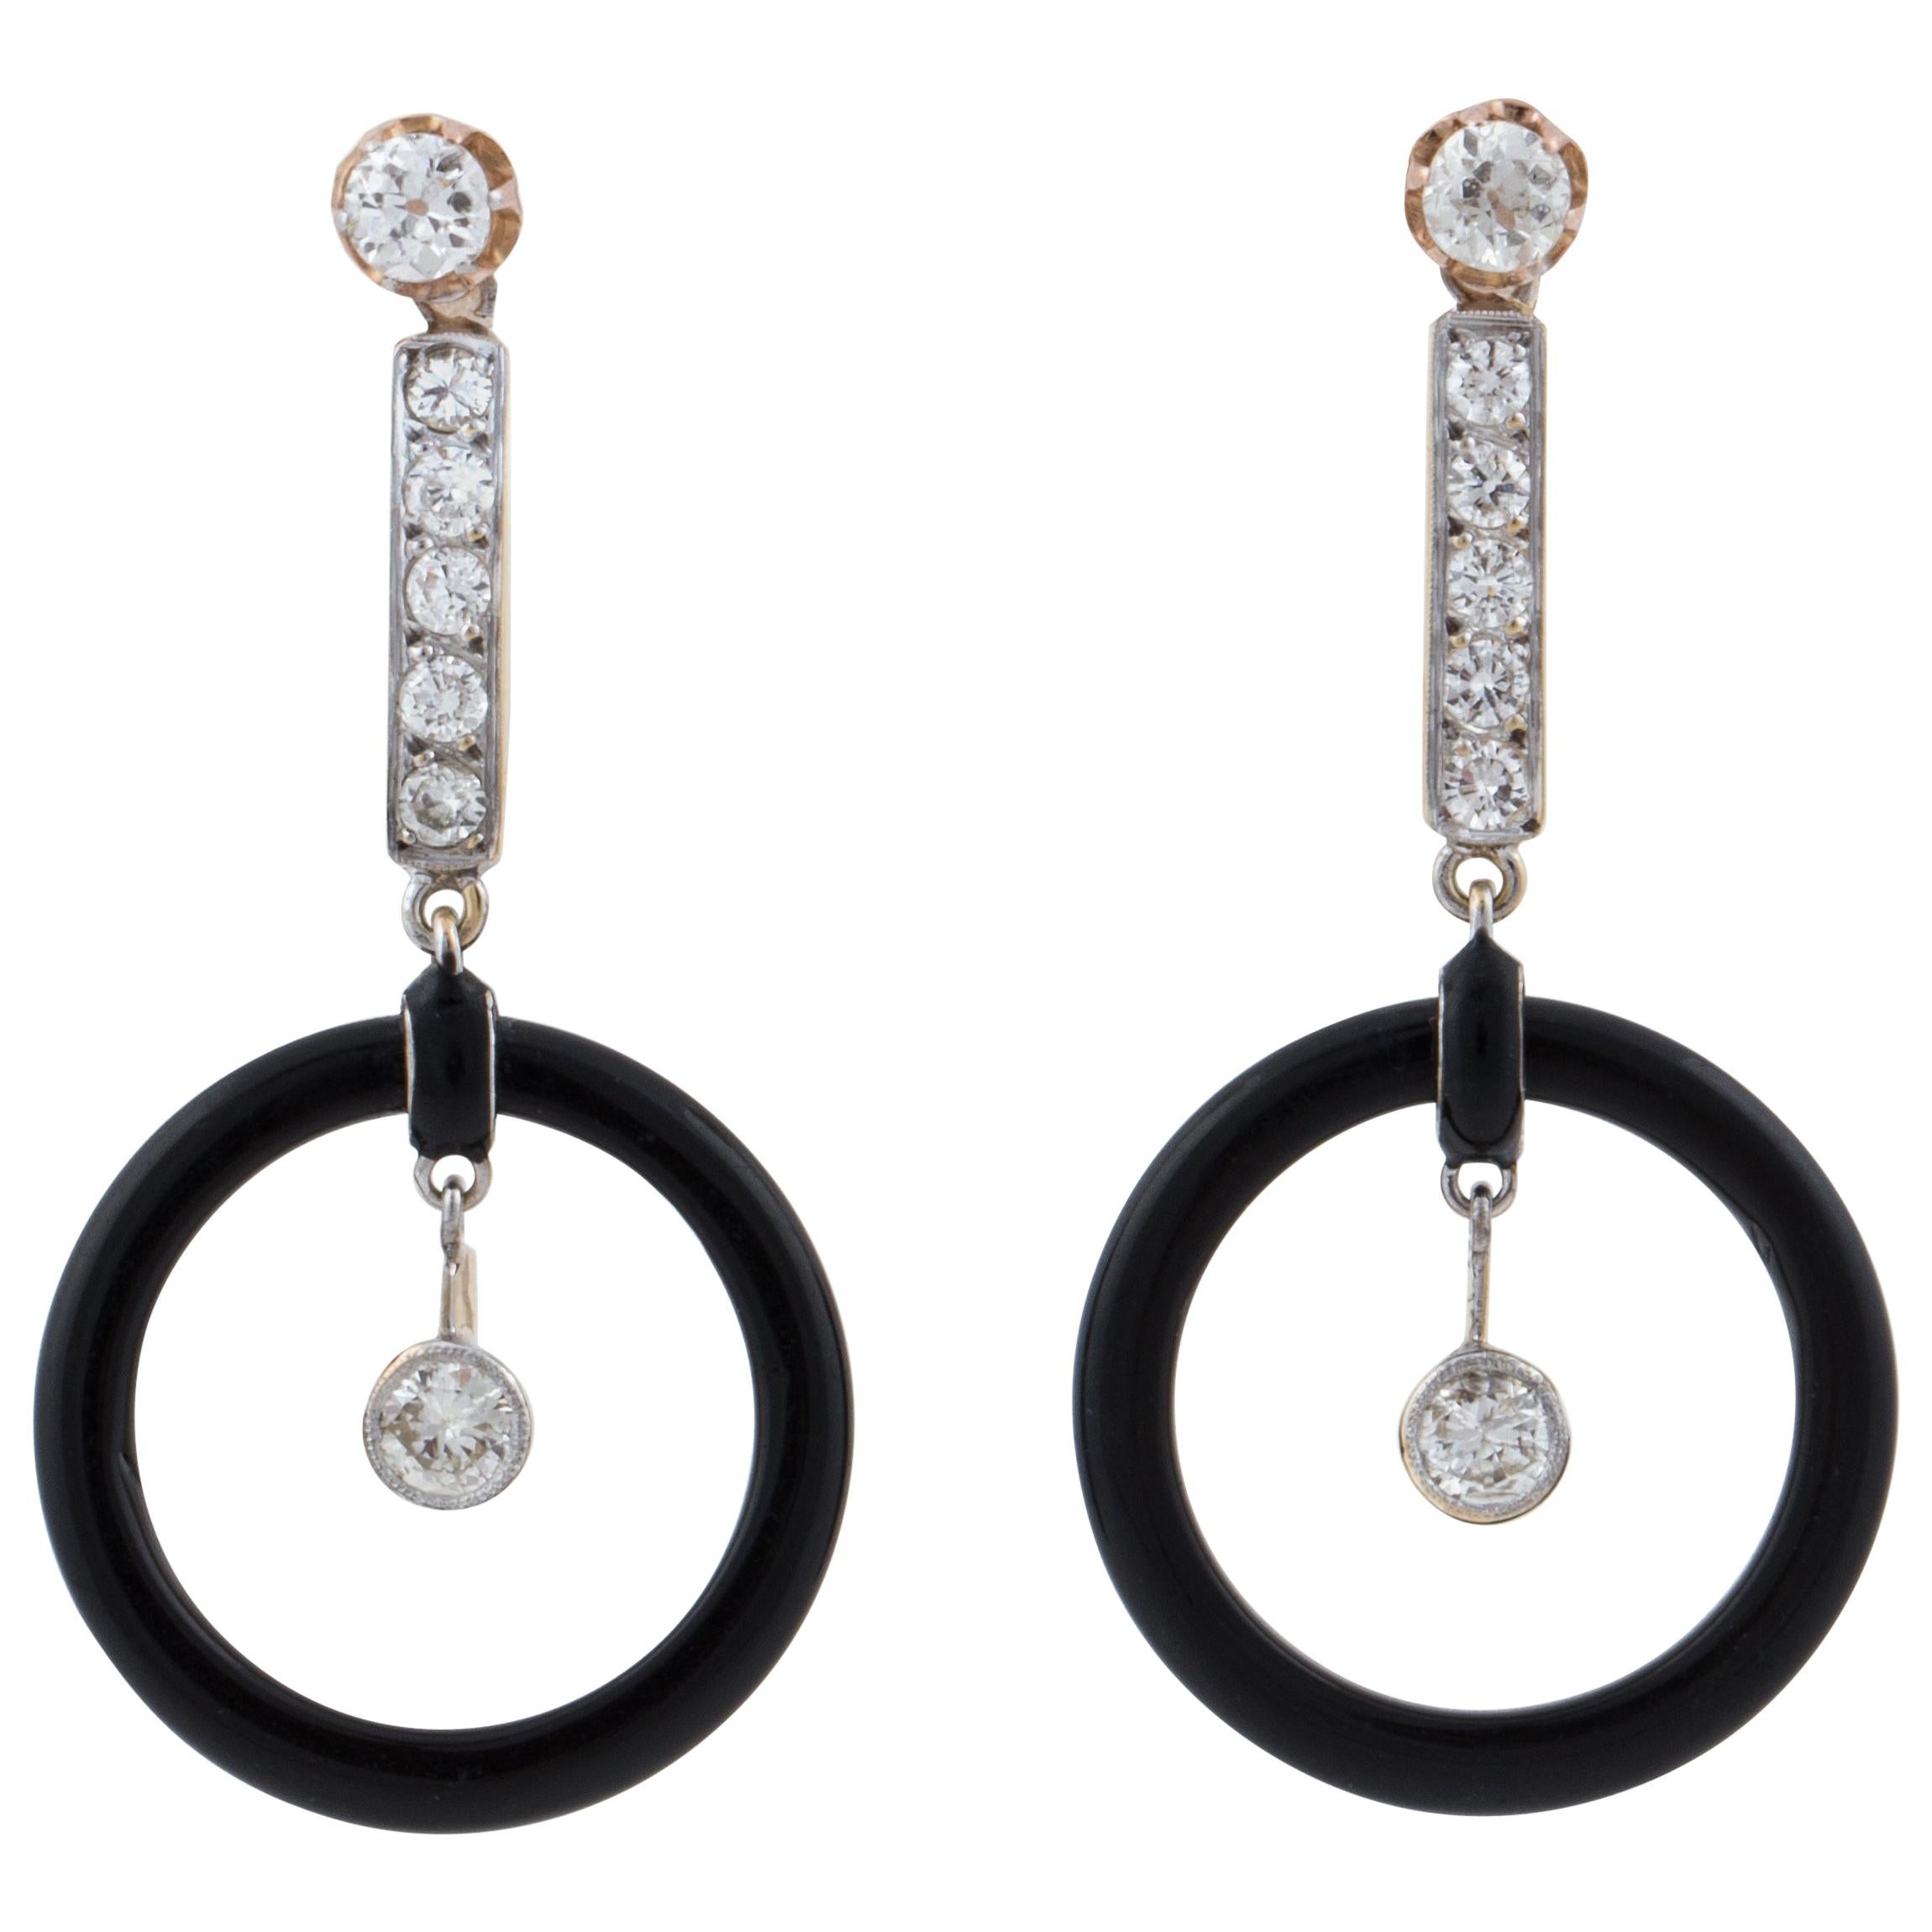 Art Deco Concentric Drop Earrings with Onyx and Diamonds